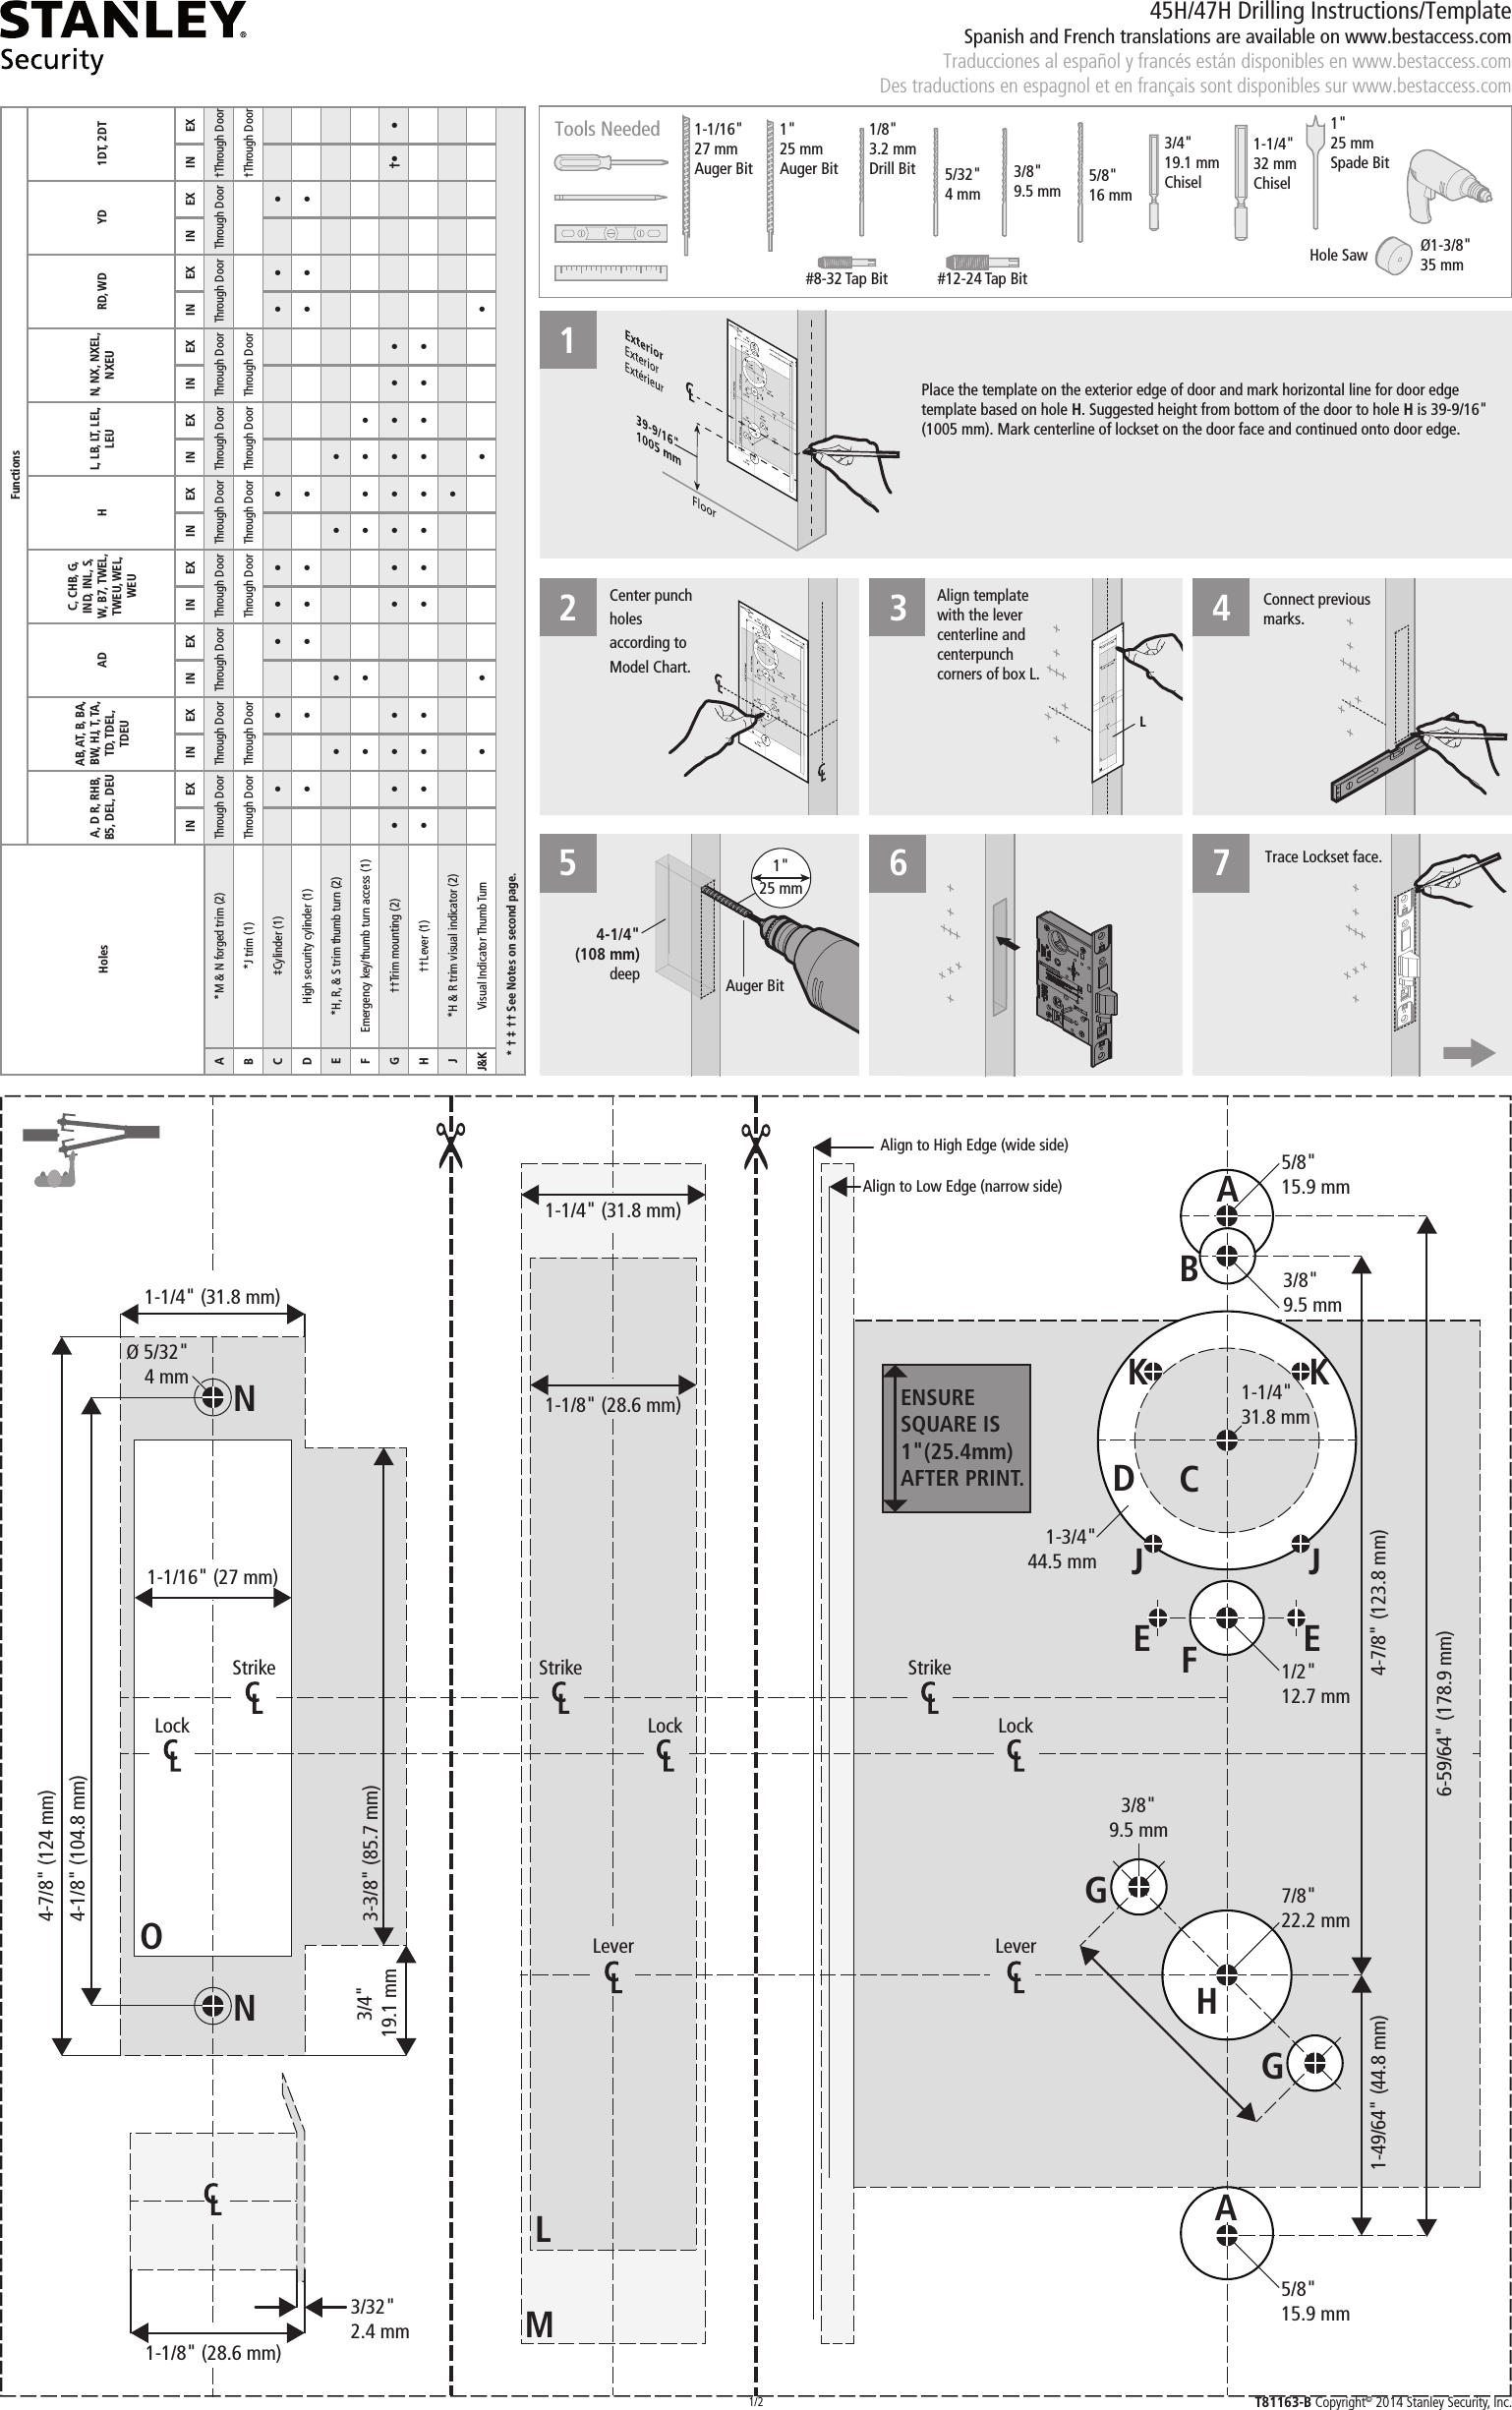 Page 1 of 2 - BEST  Drilling/Installation Instructions For 45H And 47H Mortise Locks T81163 45H-47H Drilling